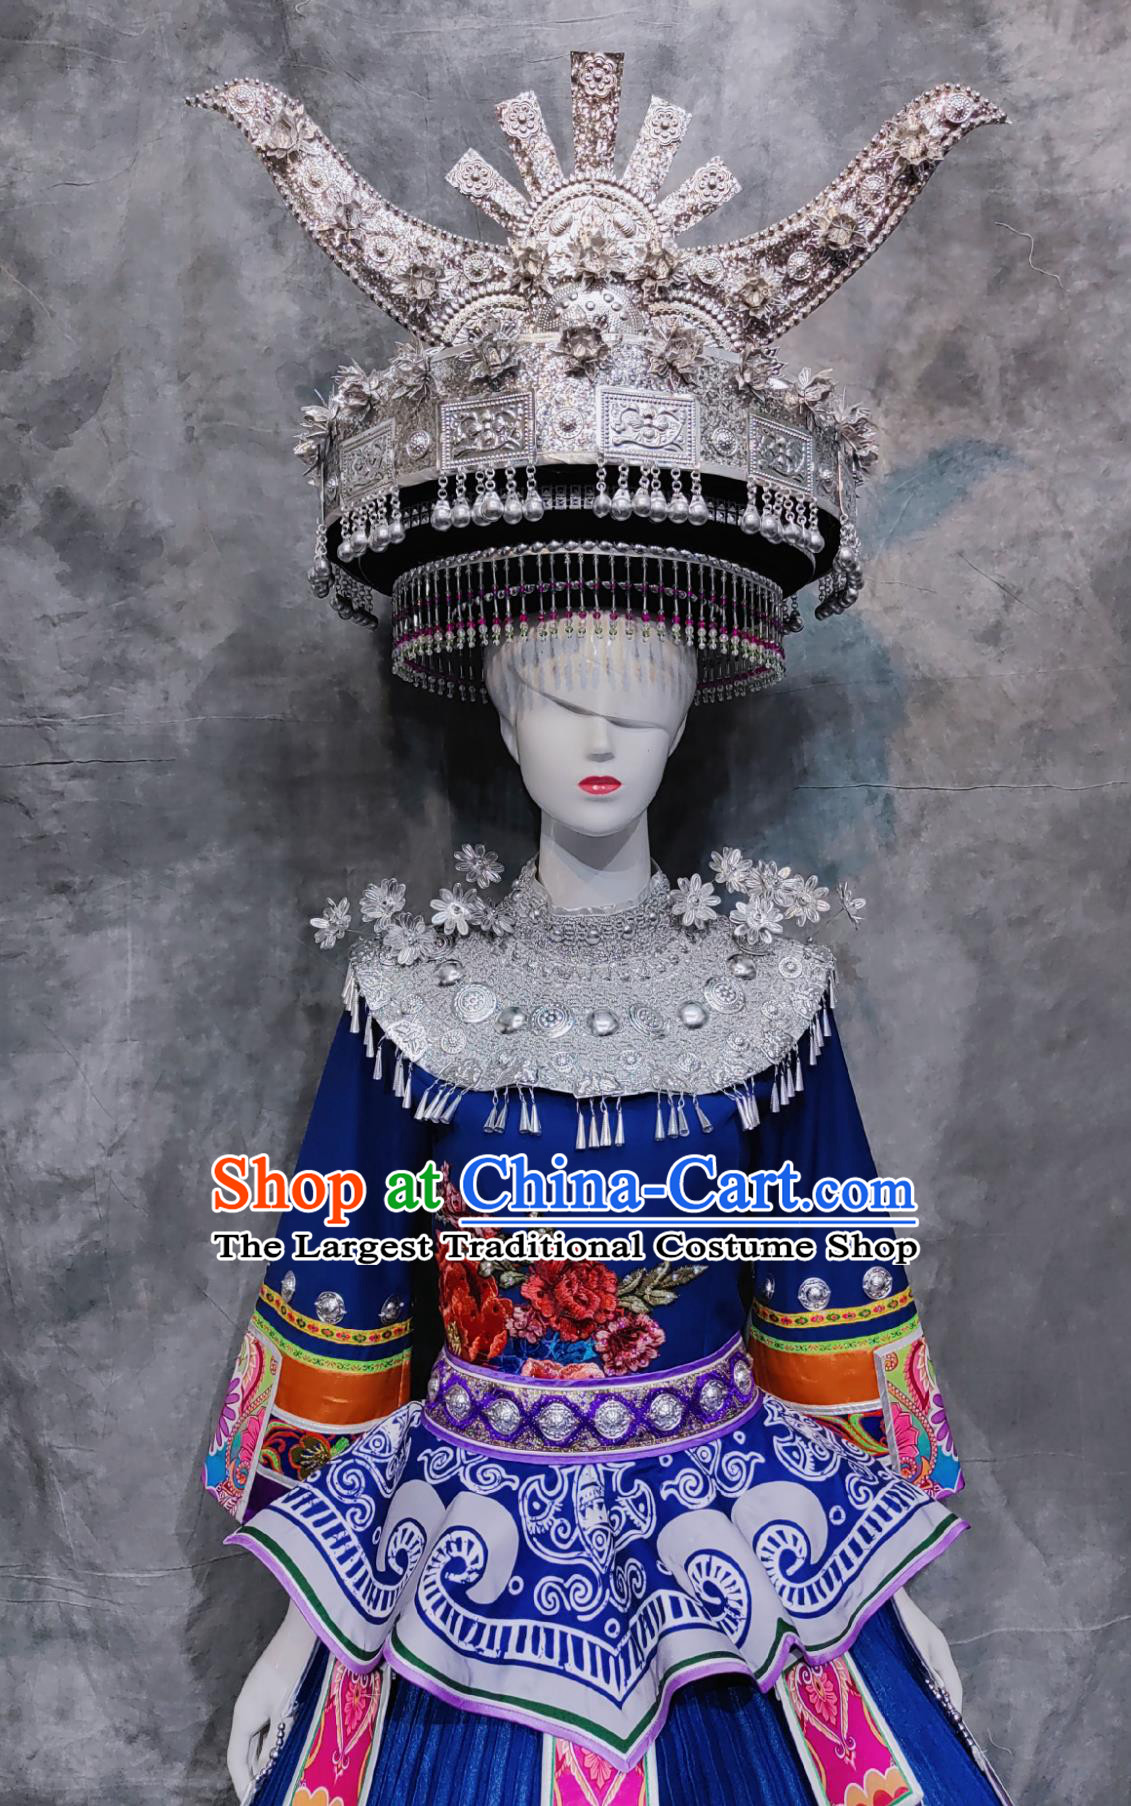 Chinese Folk Dance Costume Miao Ethnic Woman Festival Clothing China Hmong National Minority Stage Performance Royal Blue Dress